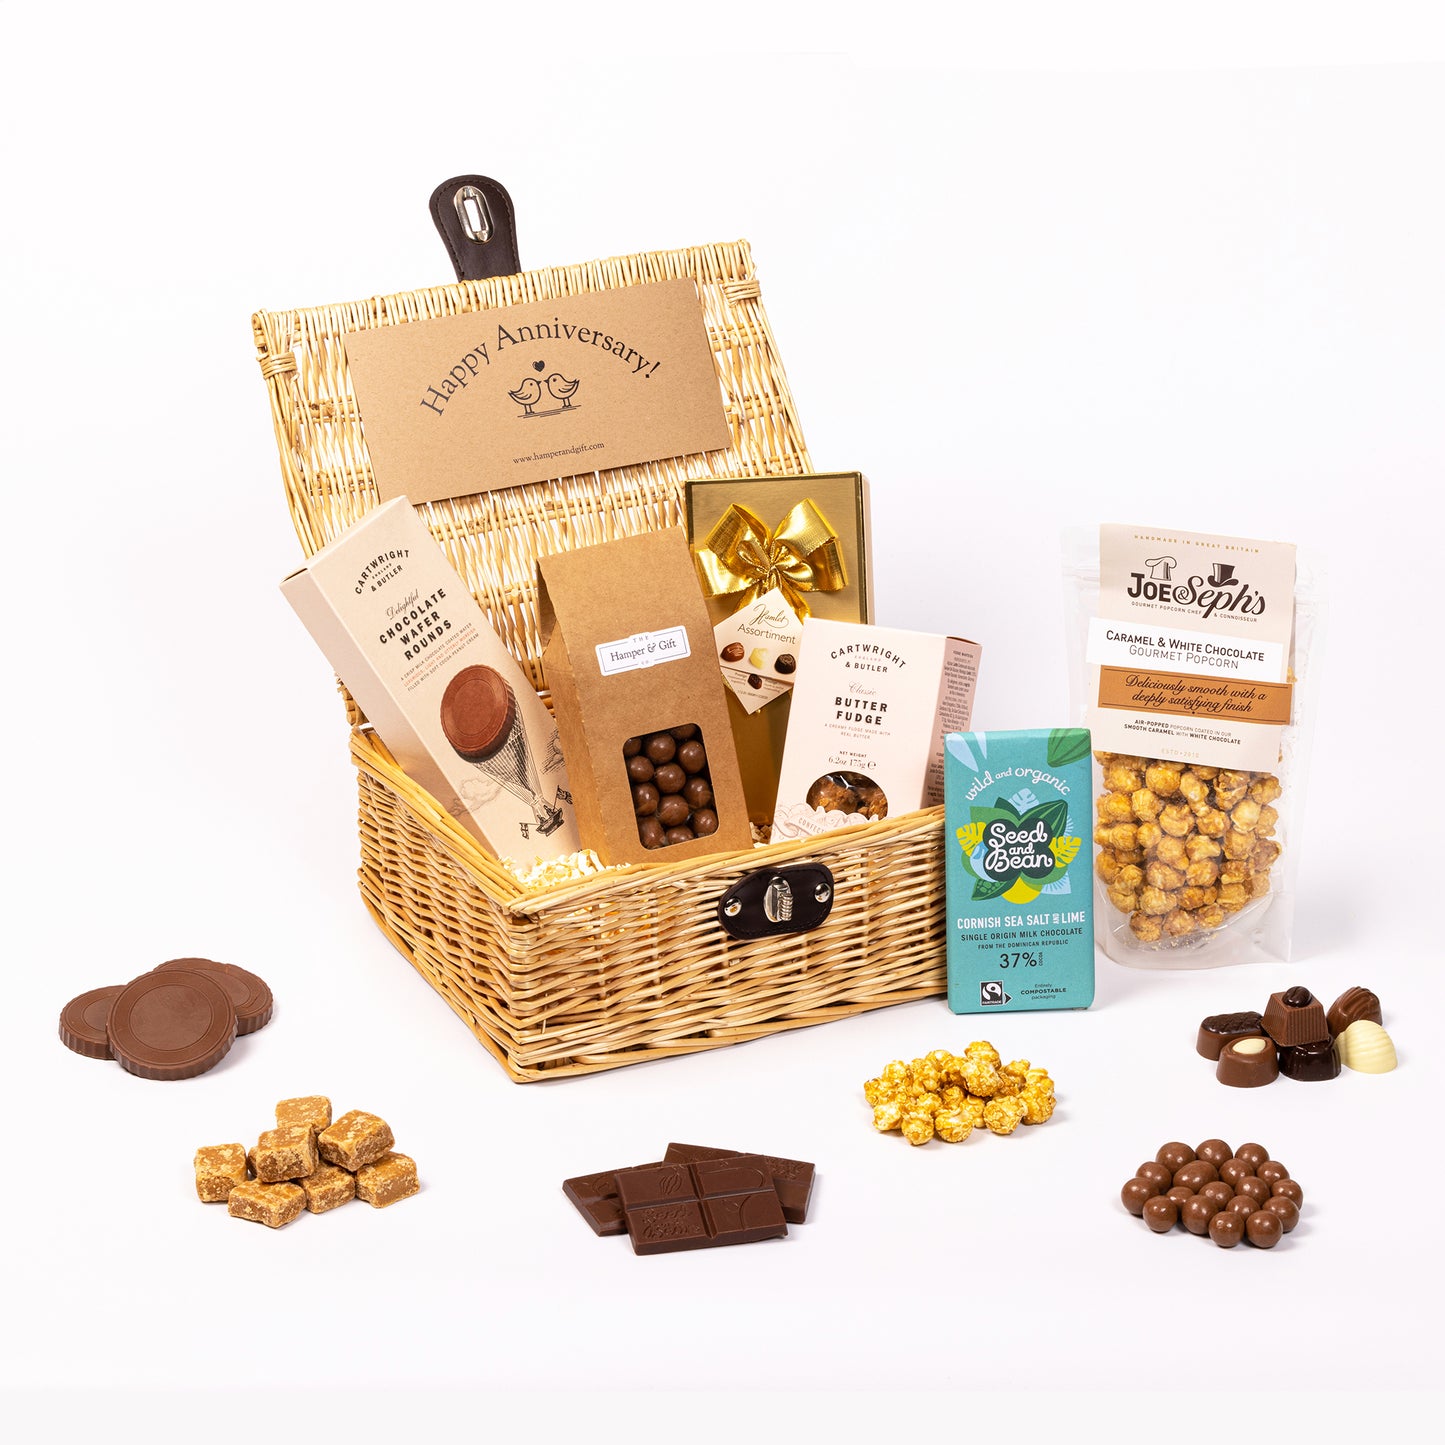 Anniversary Chocolate & Fudge Hamper filled with a variety of chocolate, fudge, biscuit and gourmet popcorn